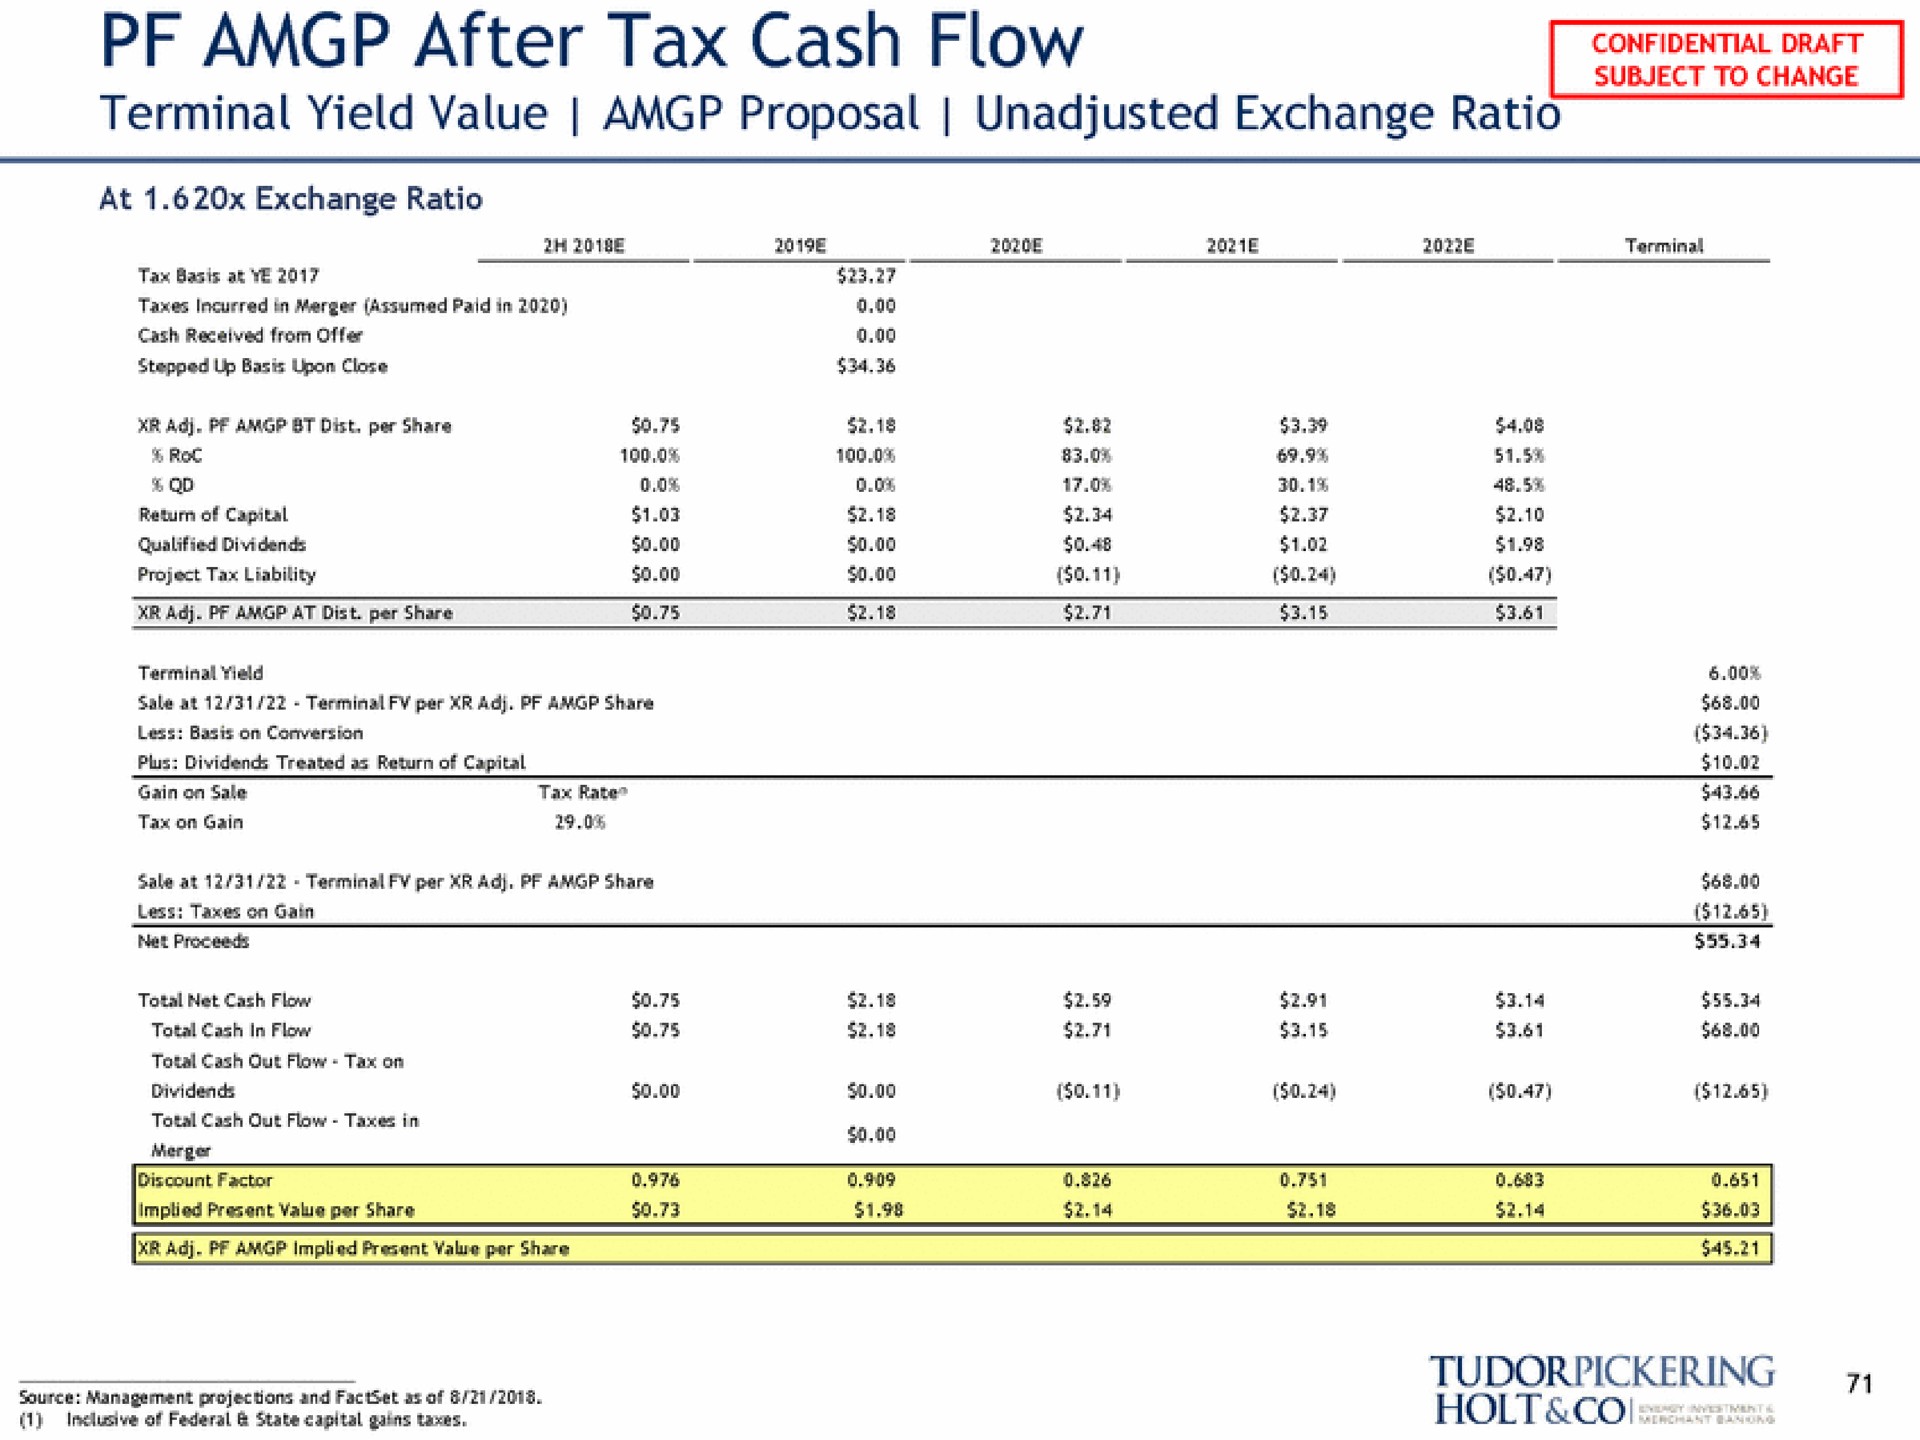 after tax cash flow terminal yield value proposal unadjusted exchange ratio | Tudor, Pickering, Holt & Co